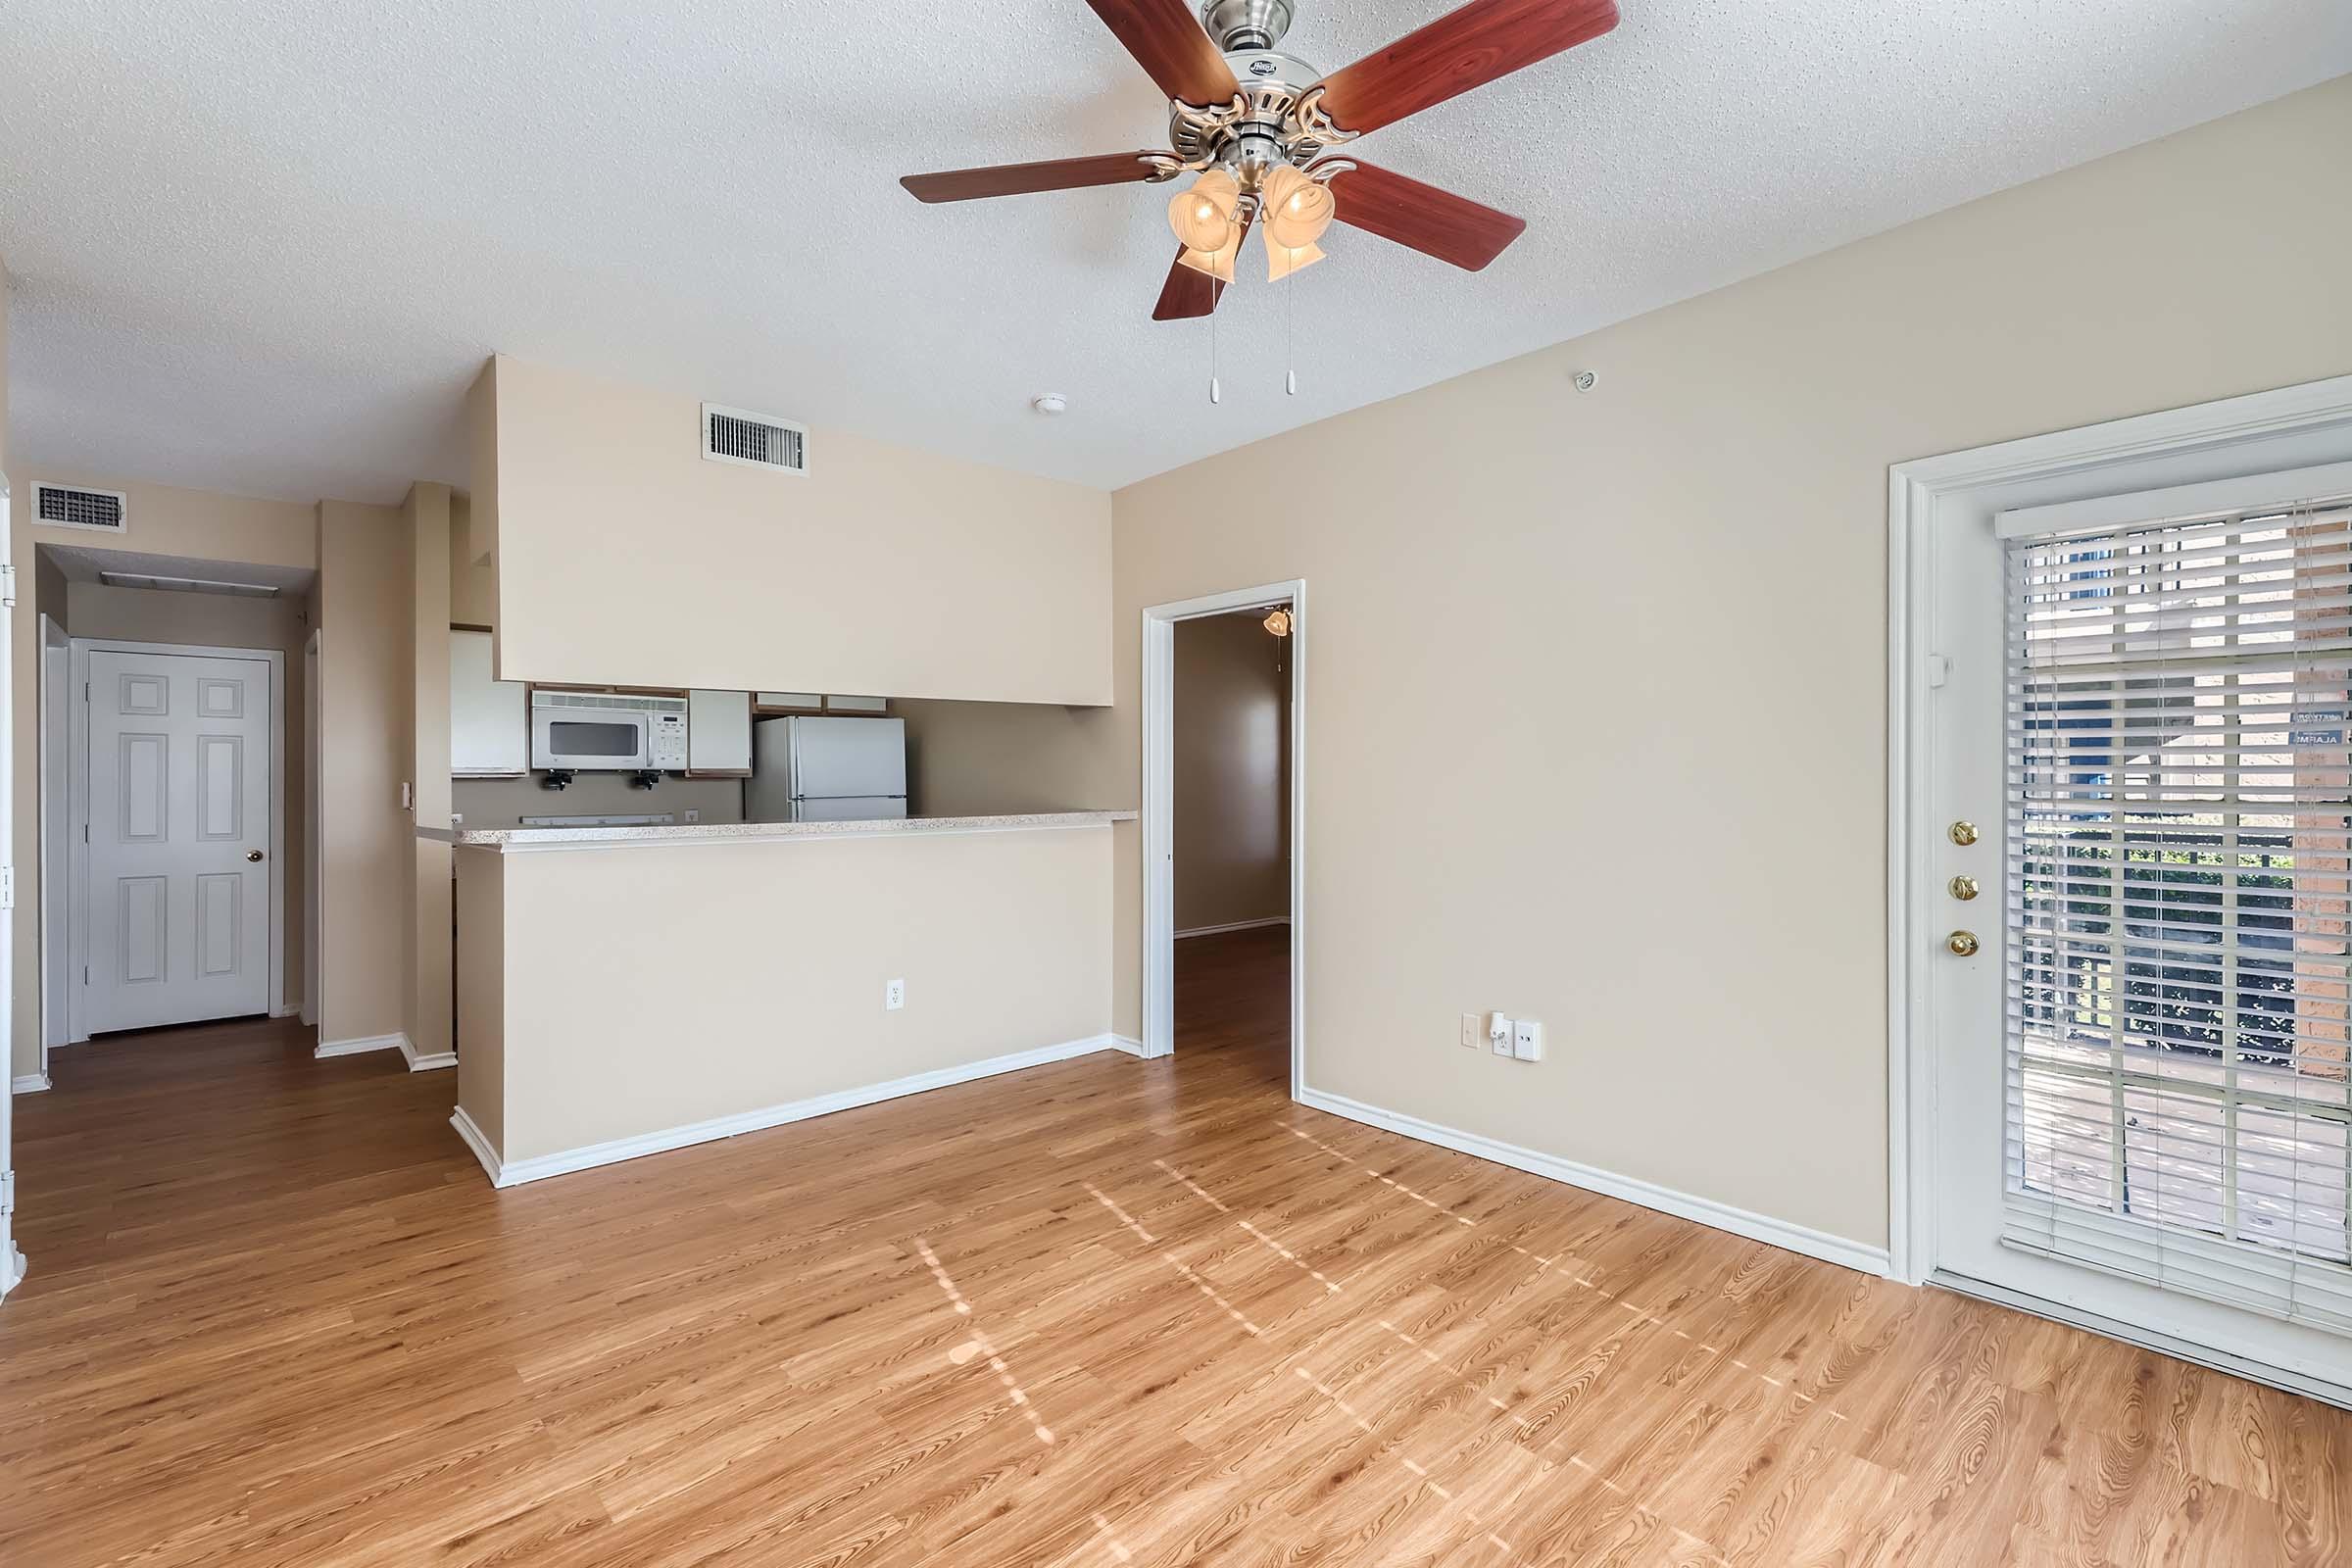 Wood-style flooring, a kitchen and French doors leading to a patio at Rise Skyline.